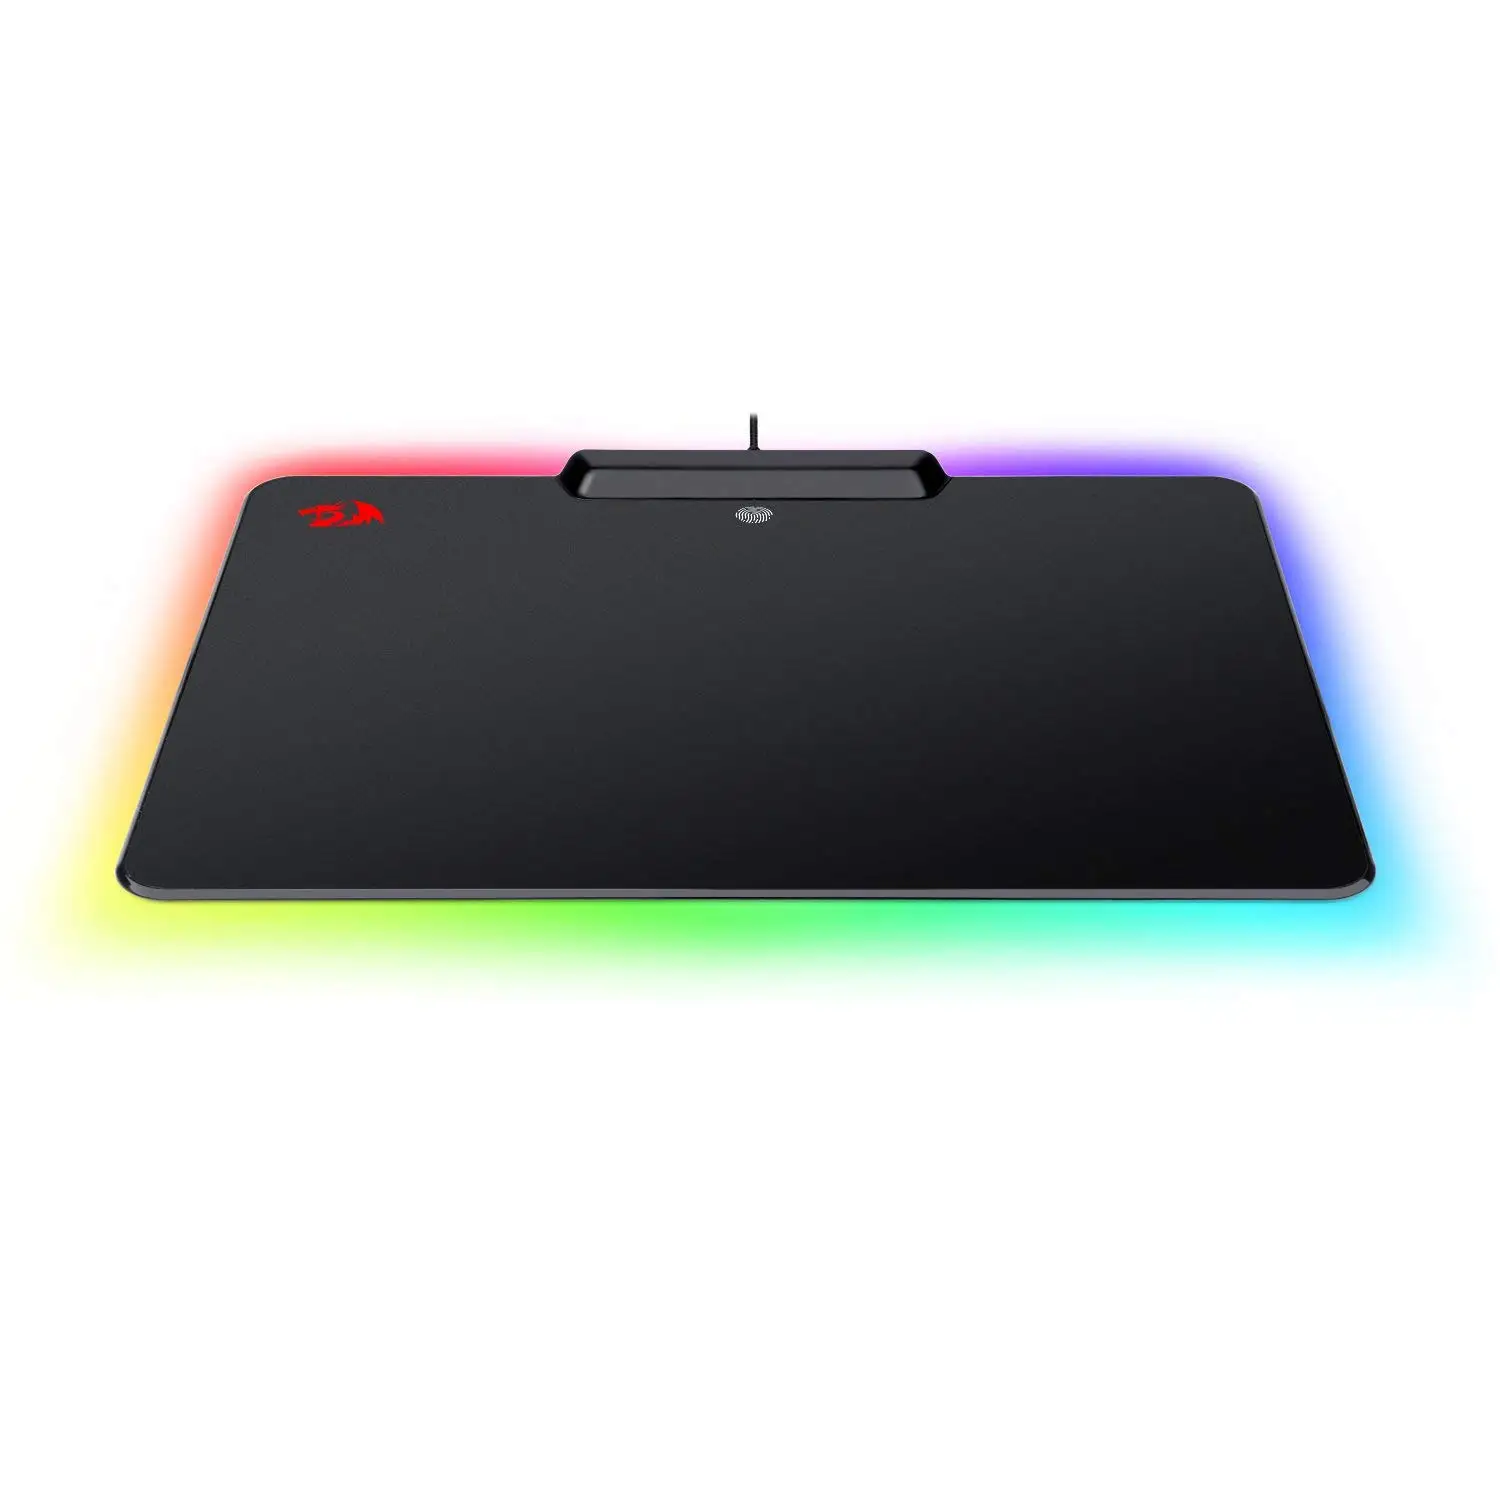 Redragon P009 Kylin Customizable 16.8 Million Colors RGB LED Gaming Mouse Pad